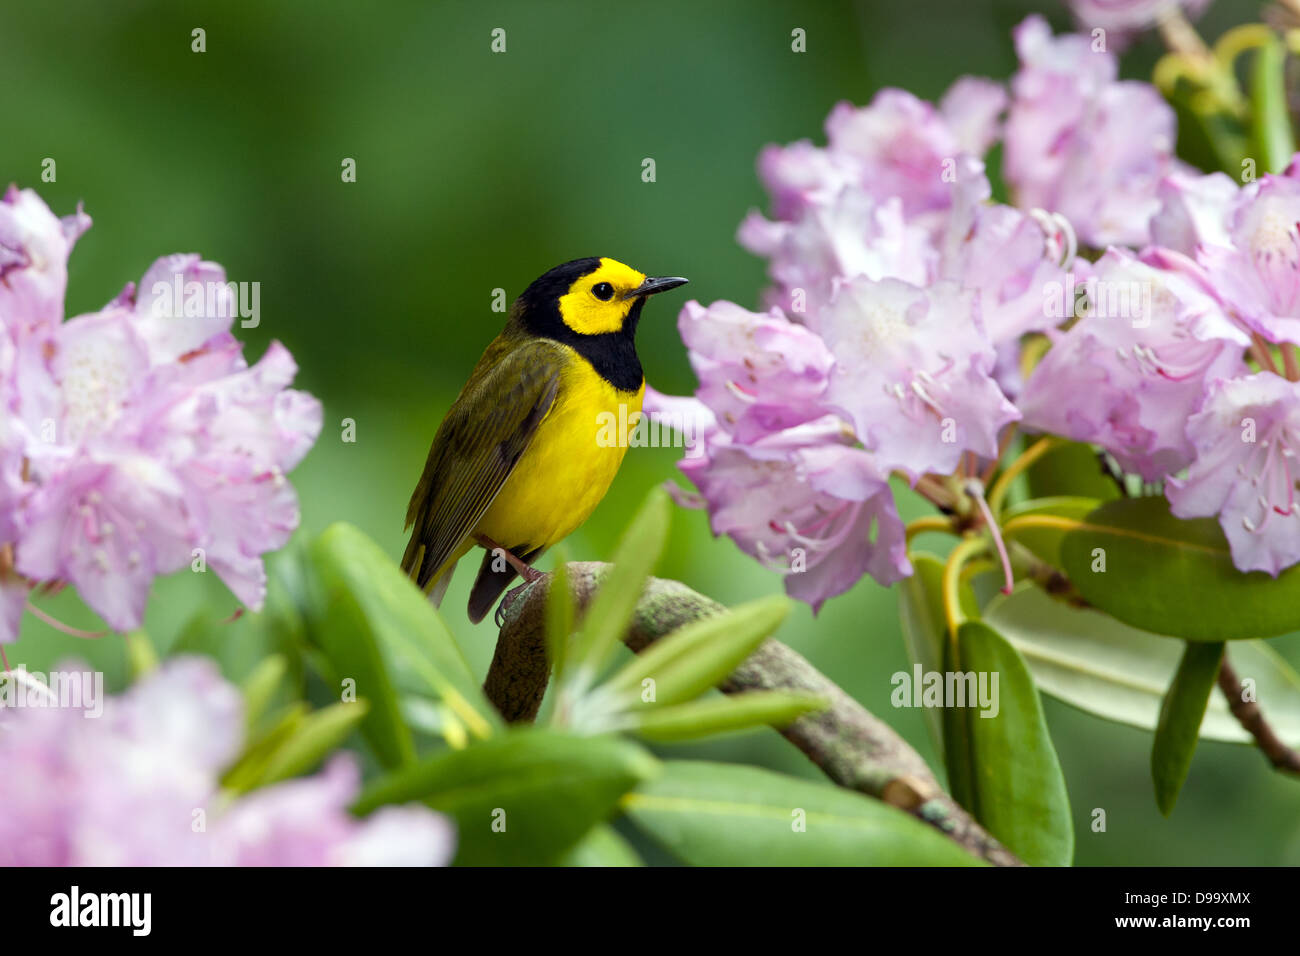 Hooded Warbler perching in Rhododendron Blossoms bird songbird Ornithology Science Nature Wildlife Environment Stock Photo